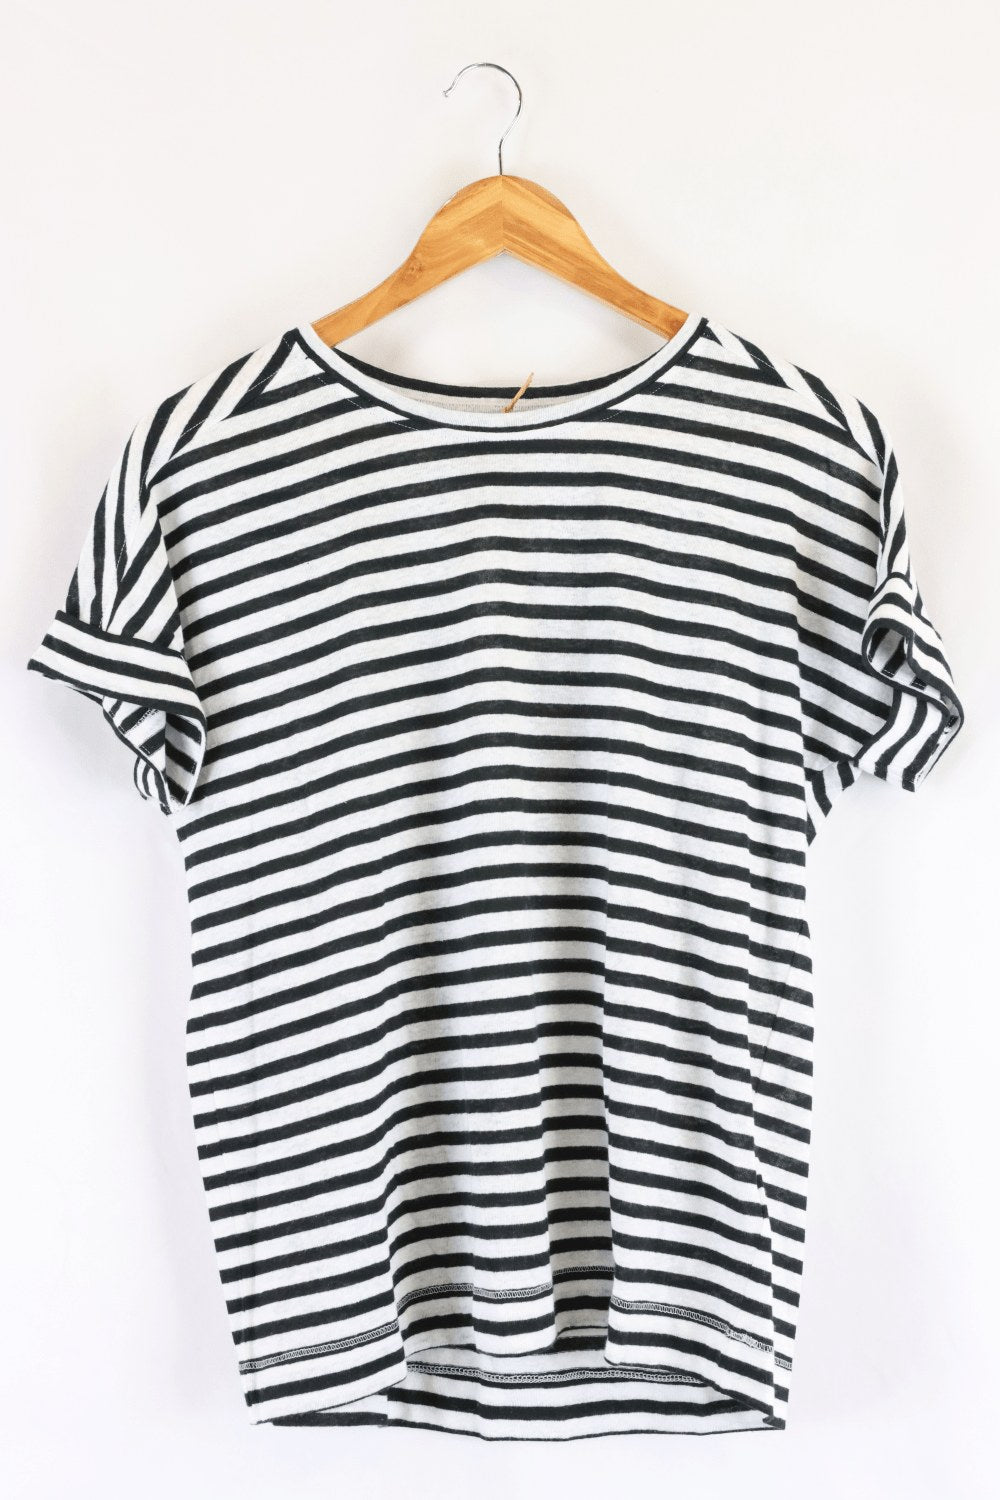 Marks and Spencer Striped Black T Shirt 10